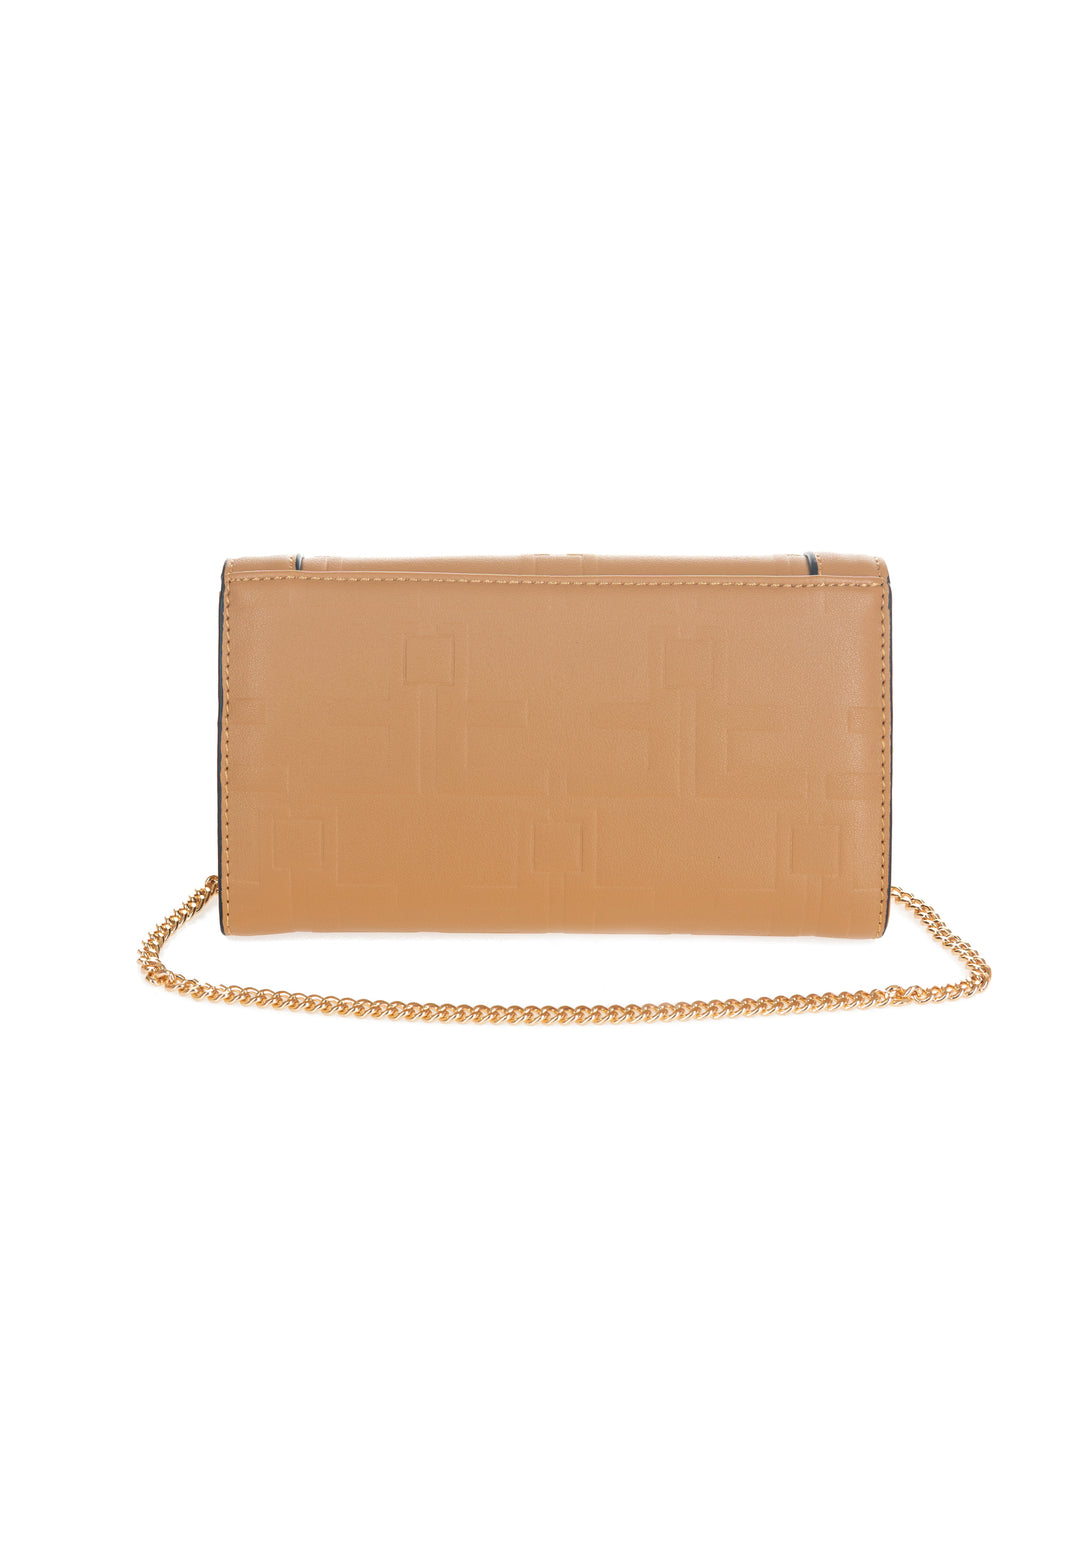 Pochette bag made in eco leather with logo